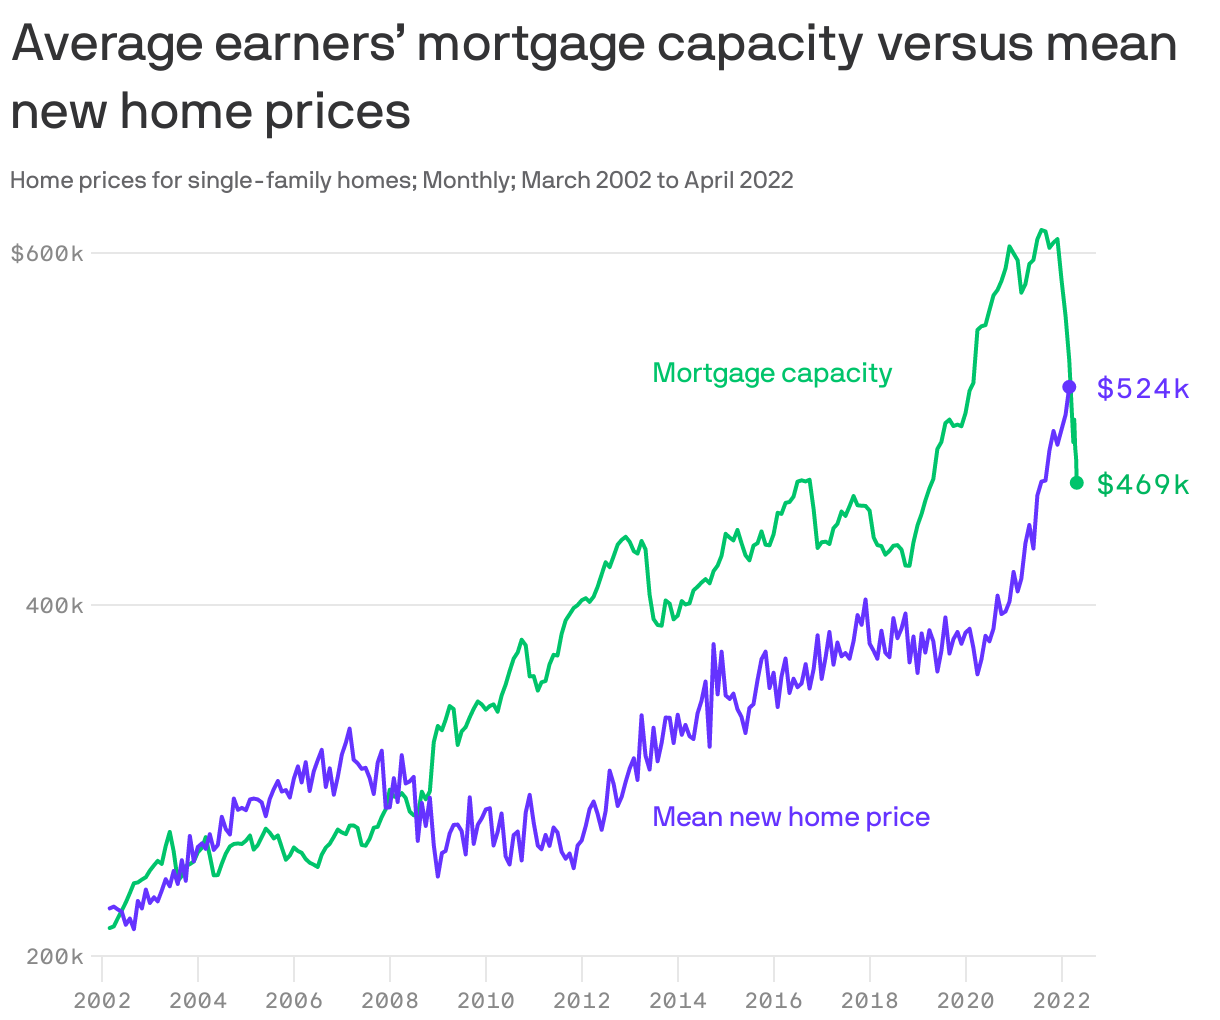 Average earners’ mortgage capacity versus mean new home prices